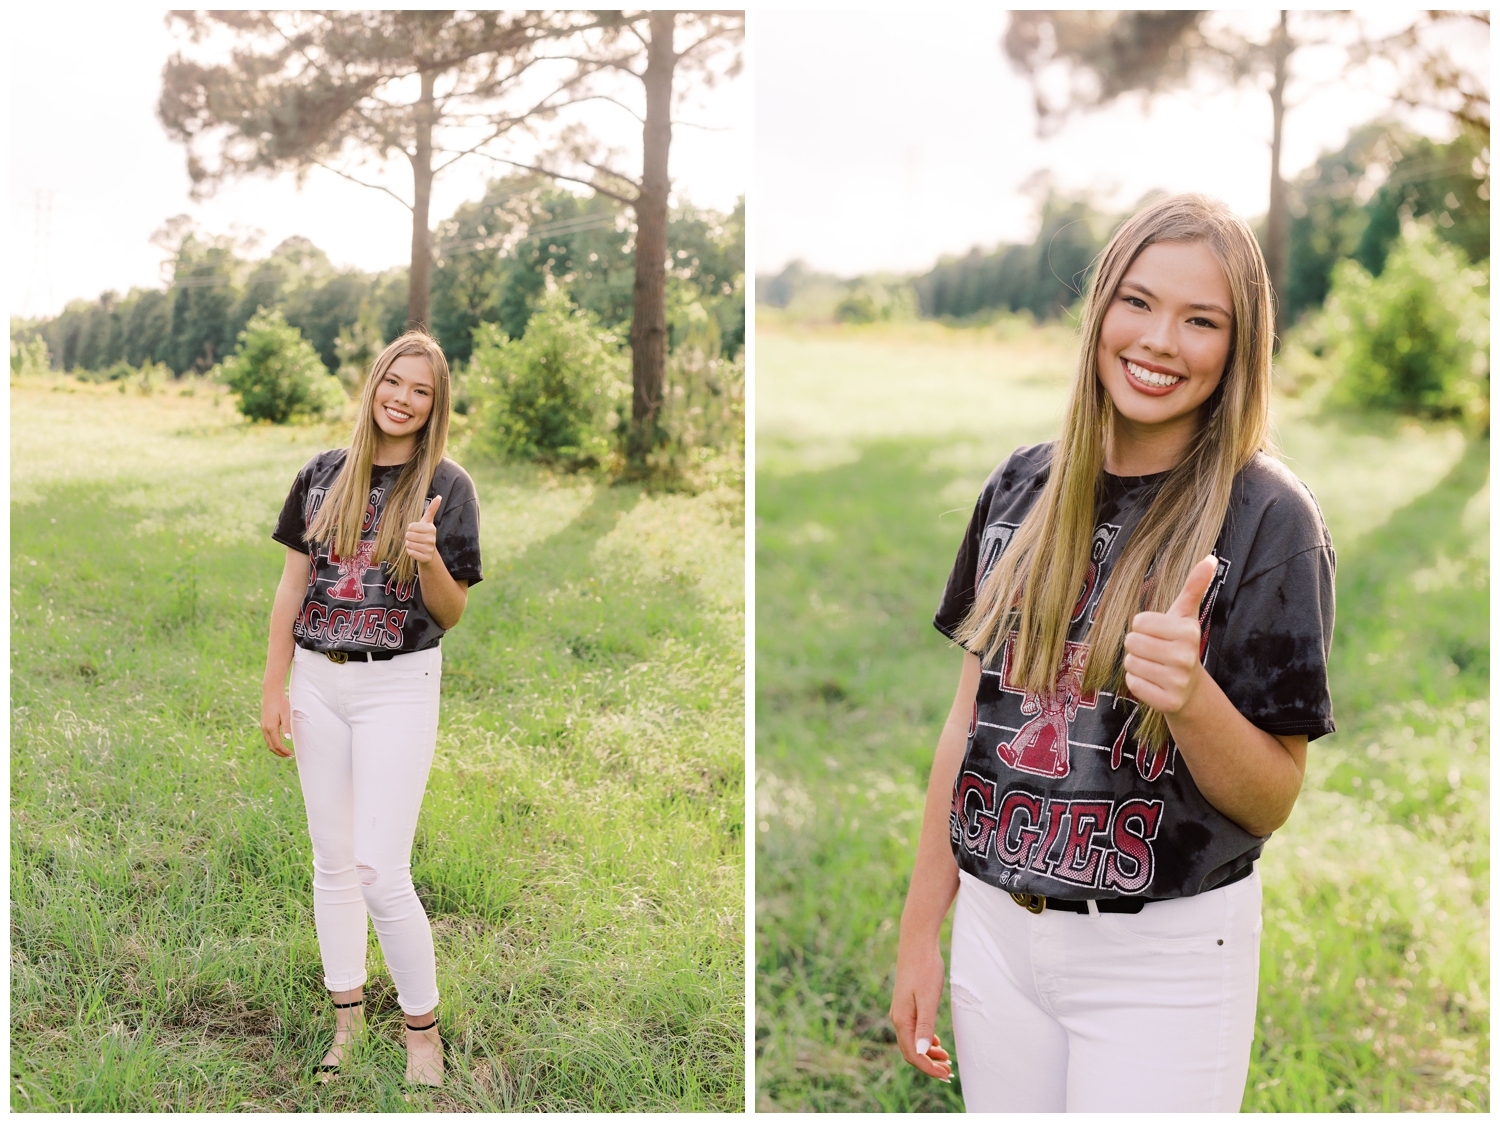 girl holding out gig em sign standing in field in college t-shirt in Houston, Texas